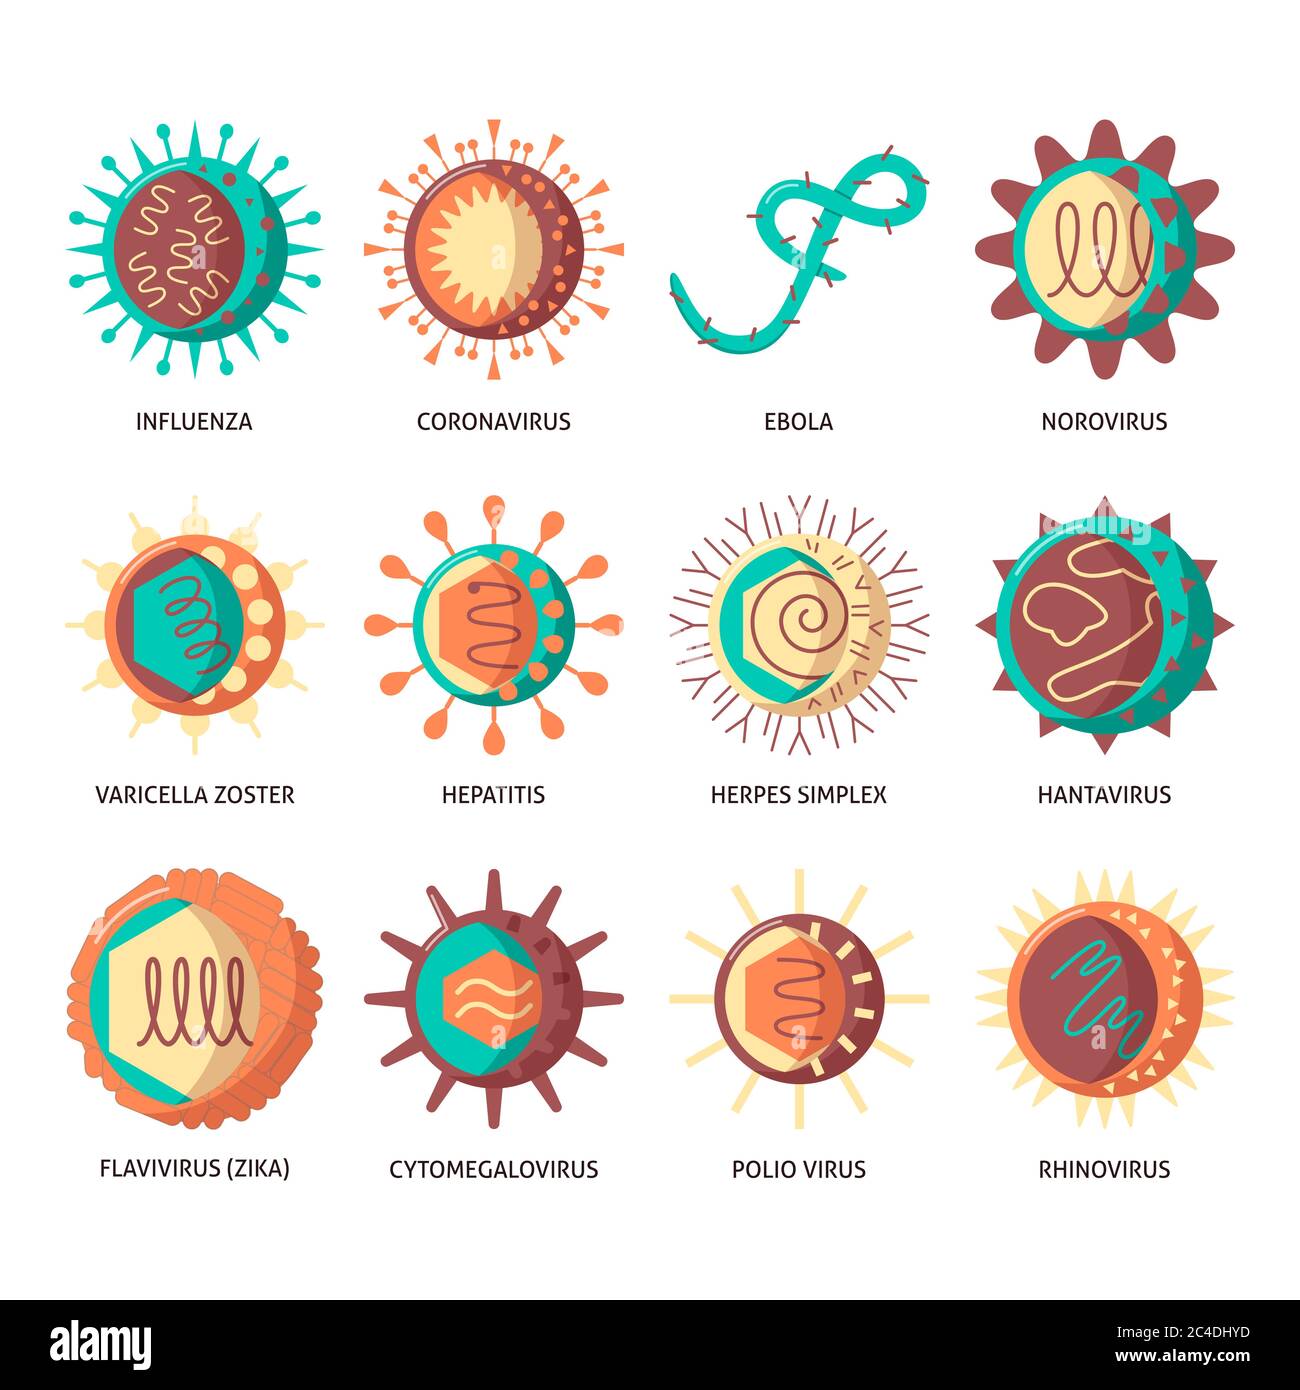 Human viruses icon set in flat style. Infection cells symbols collection. Vector illustration. Stock Vector